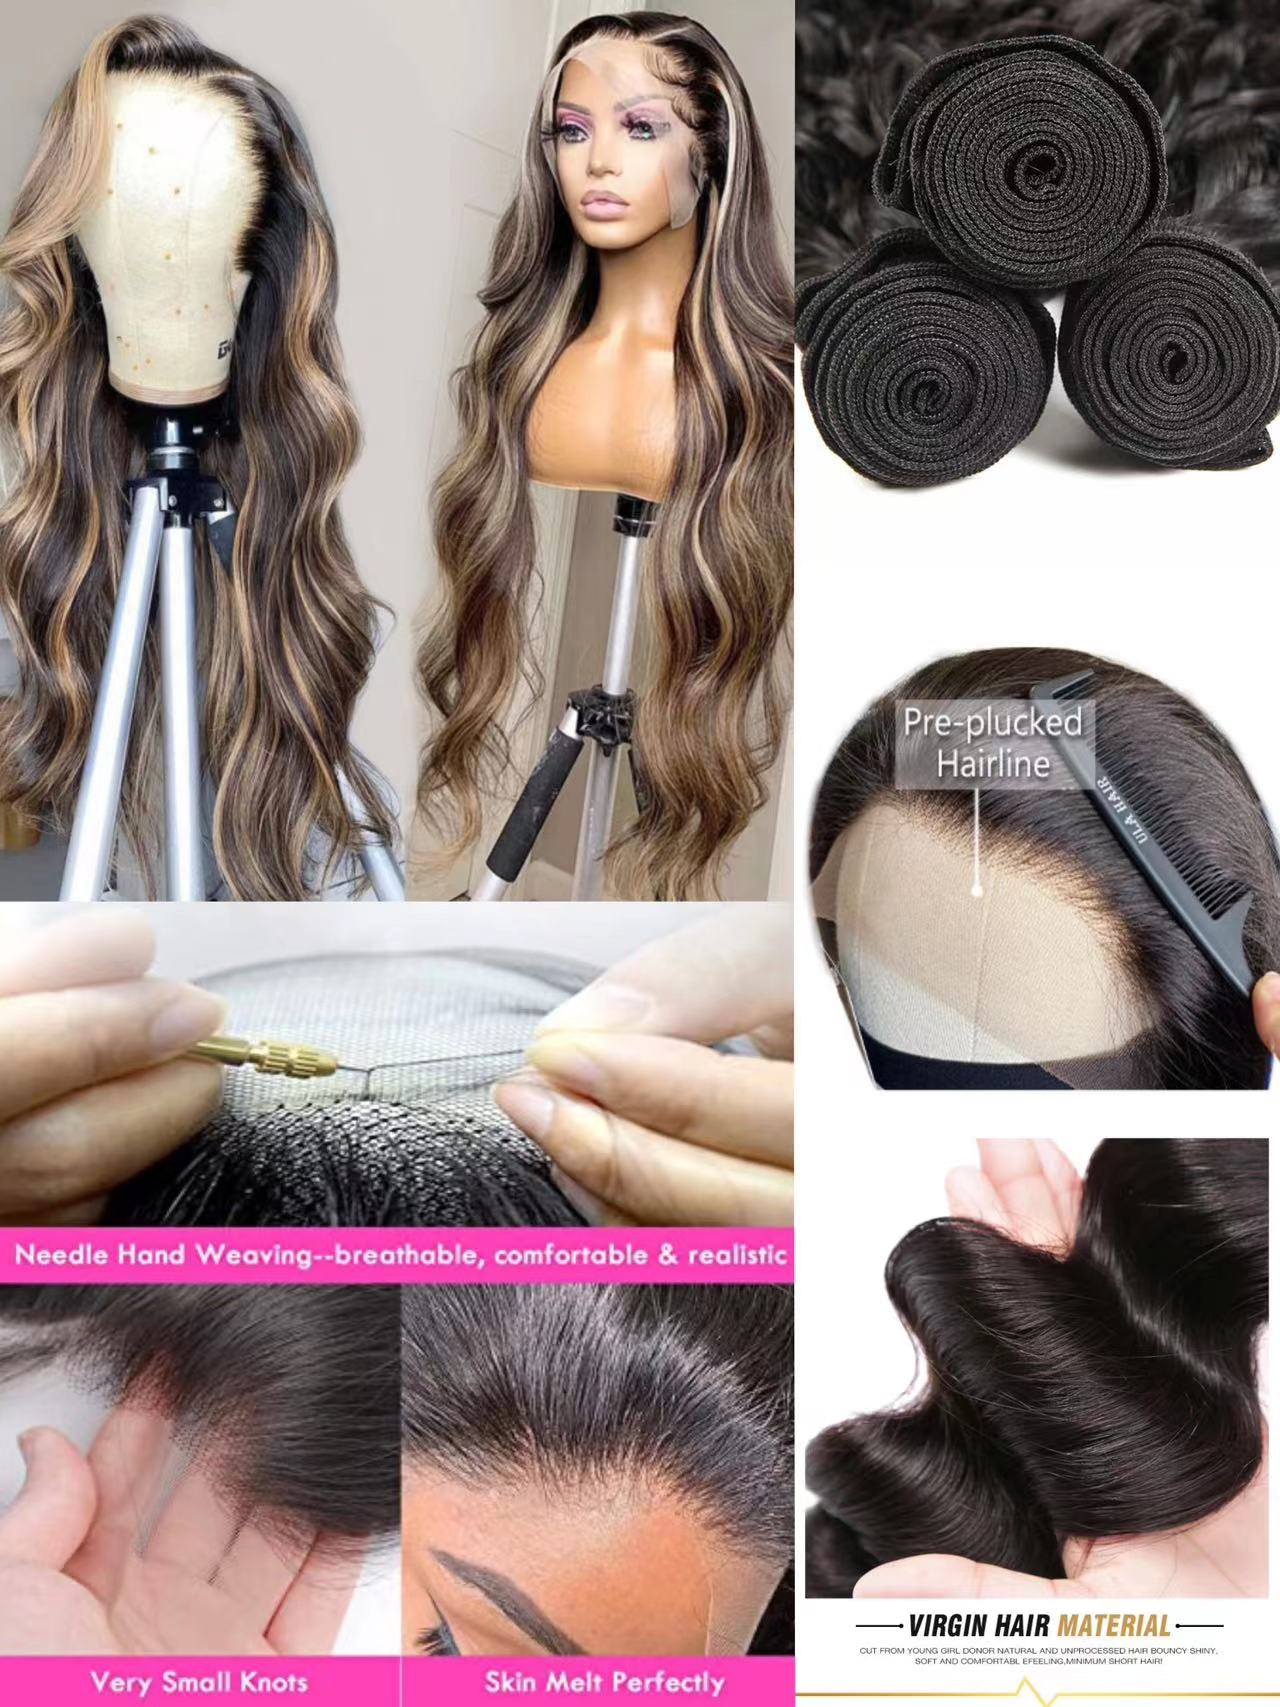 high quality wigs and hair